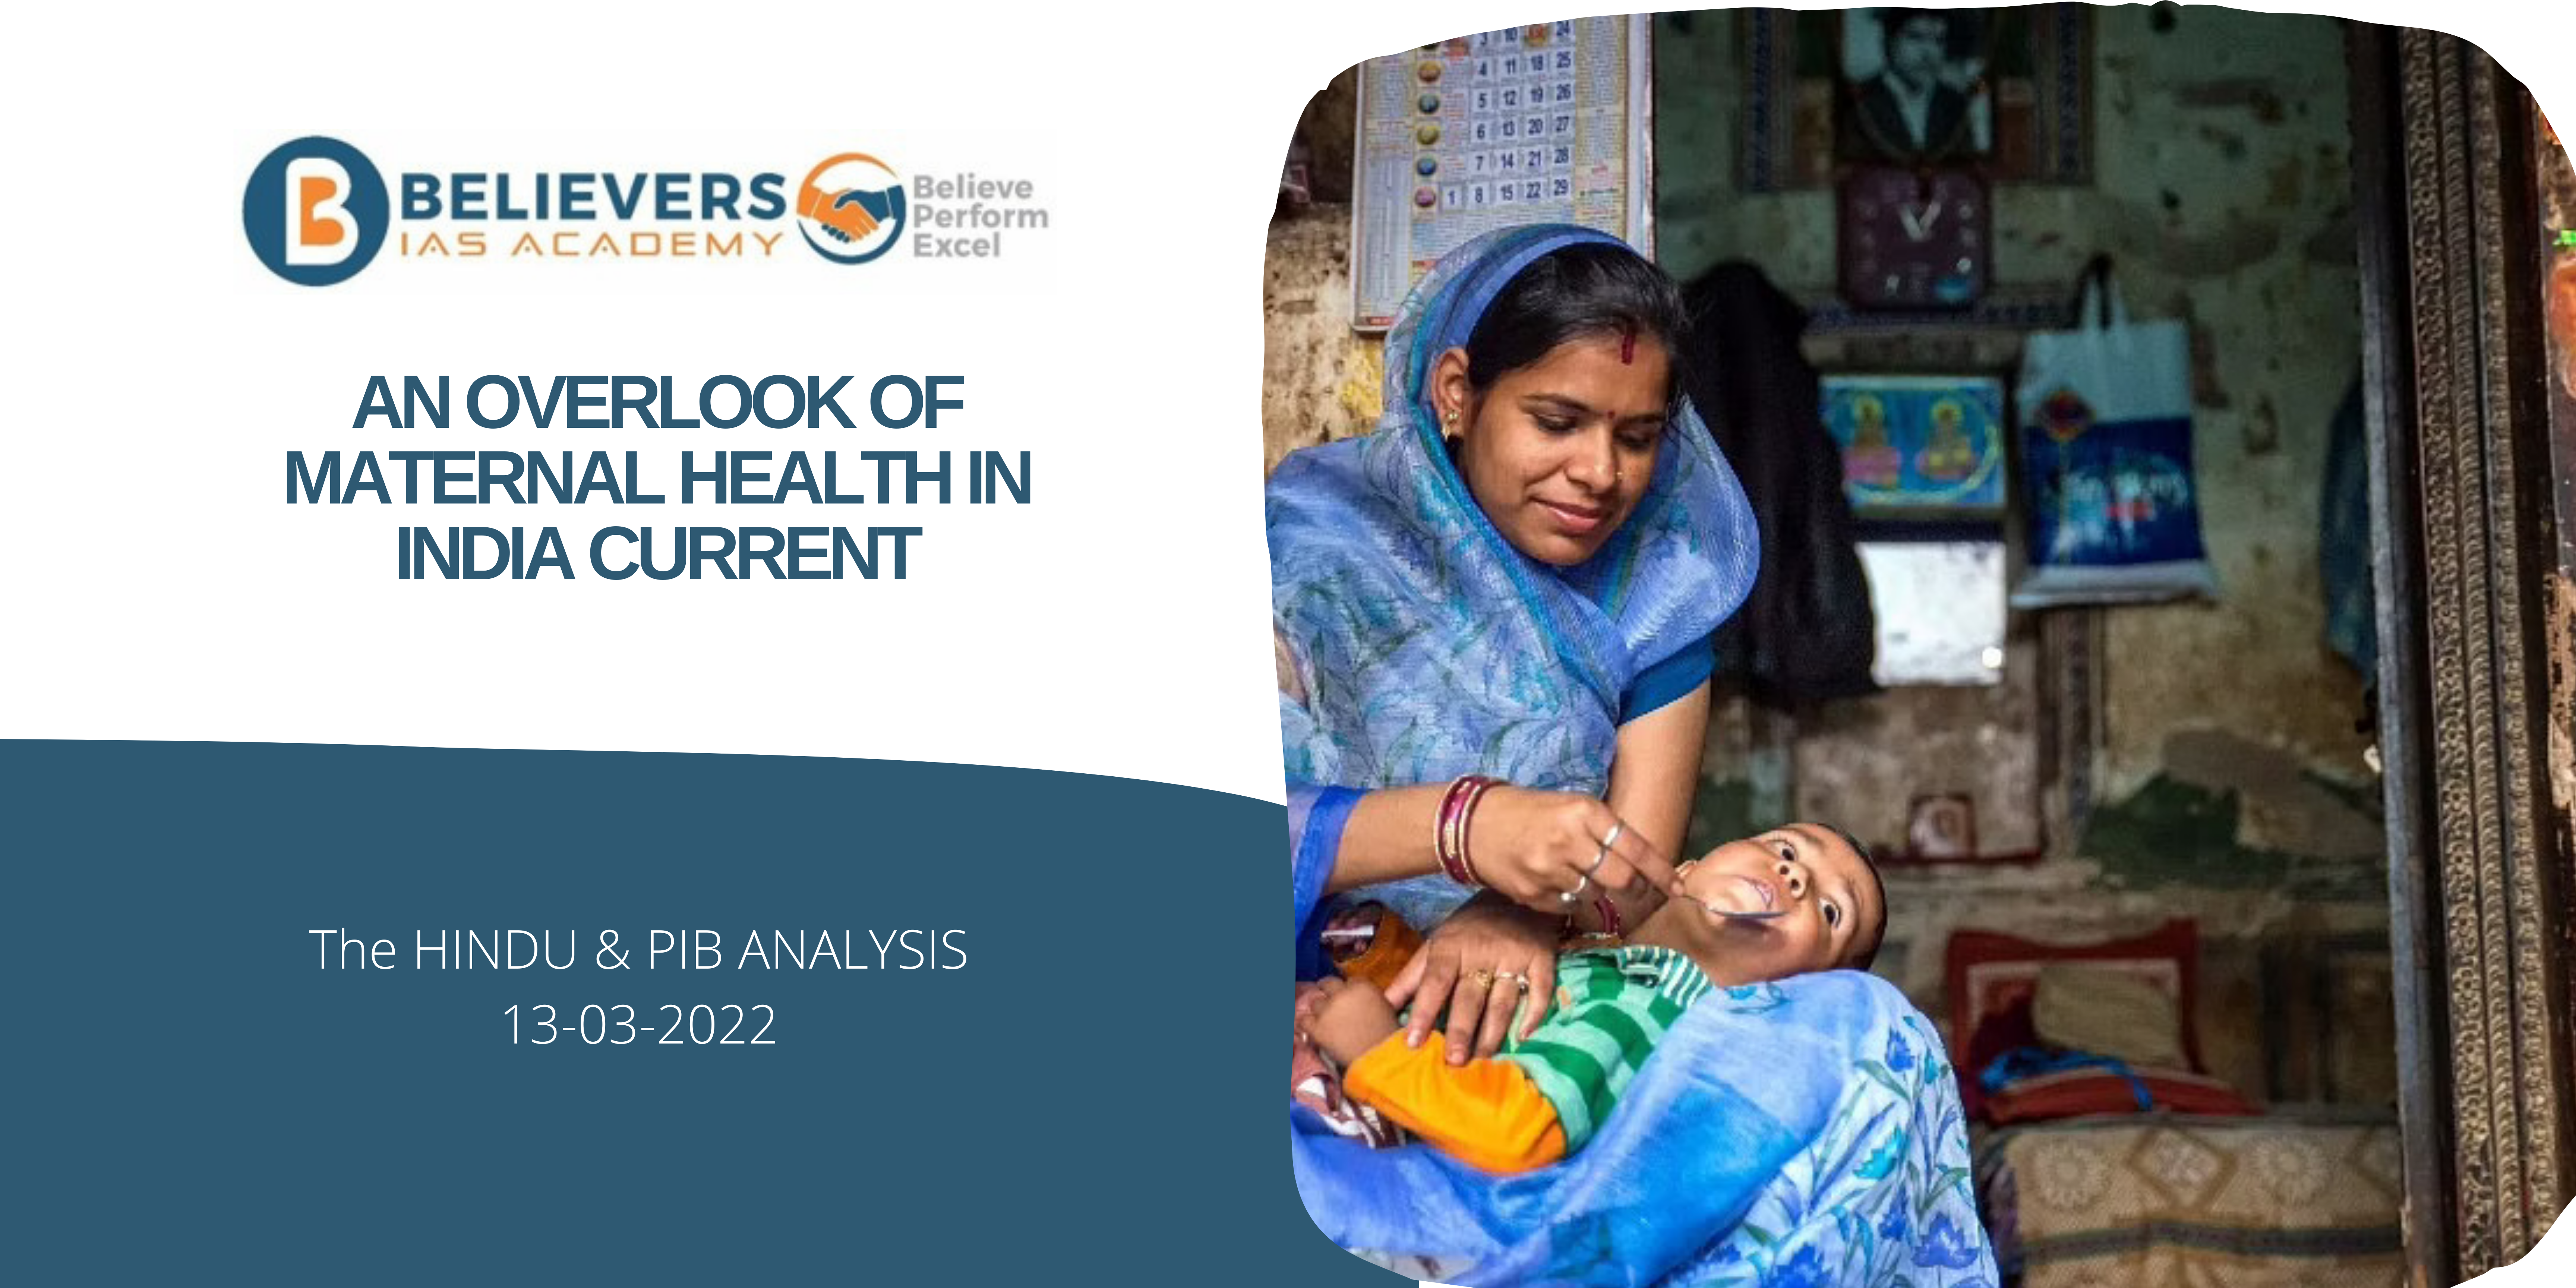 IAS Current affairs - An overlook of Maternal Health in India Current